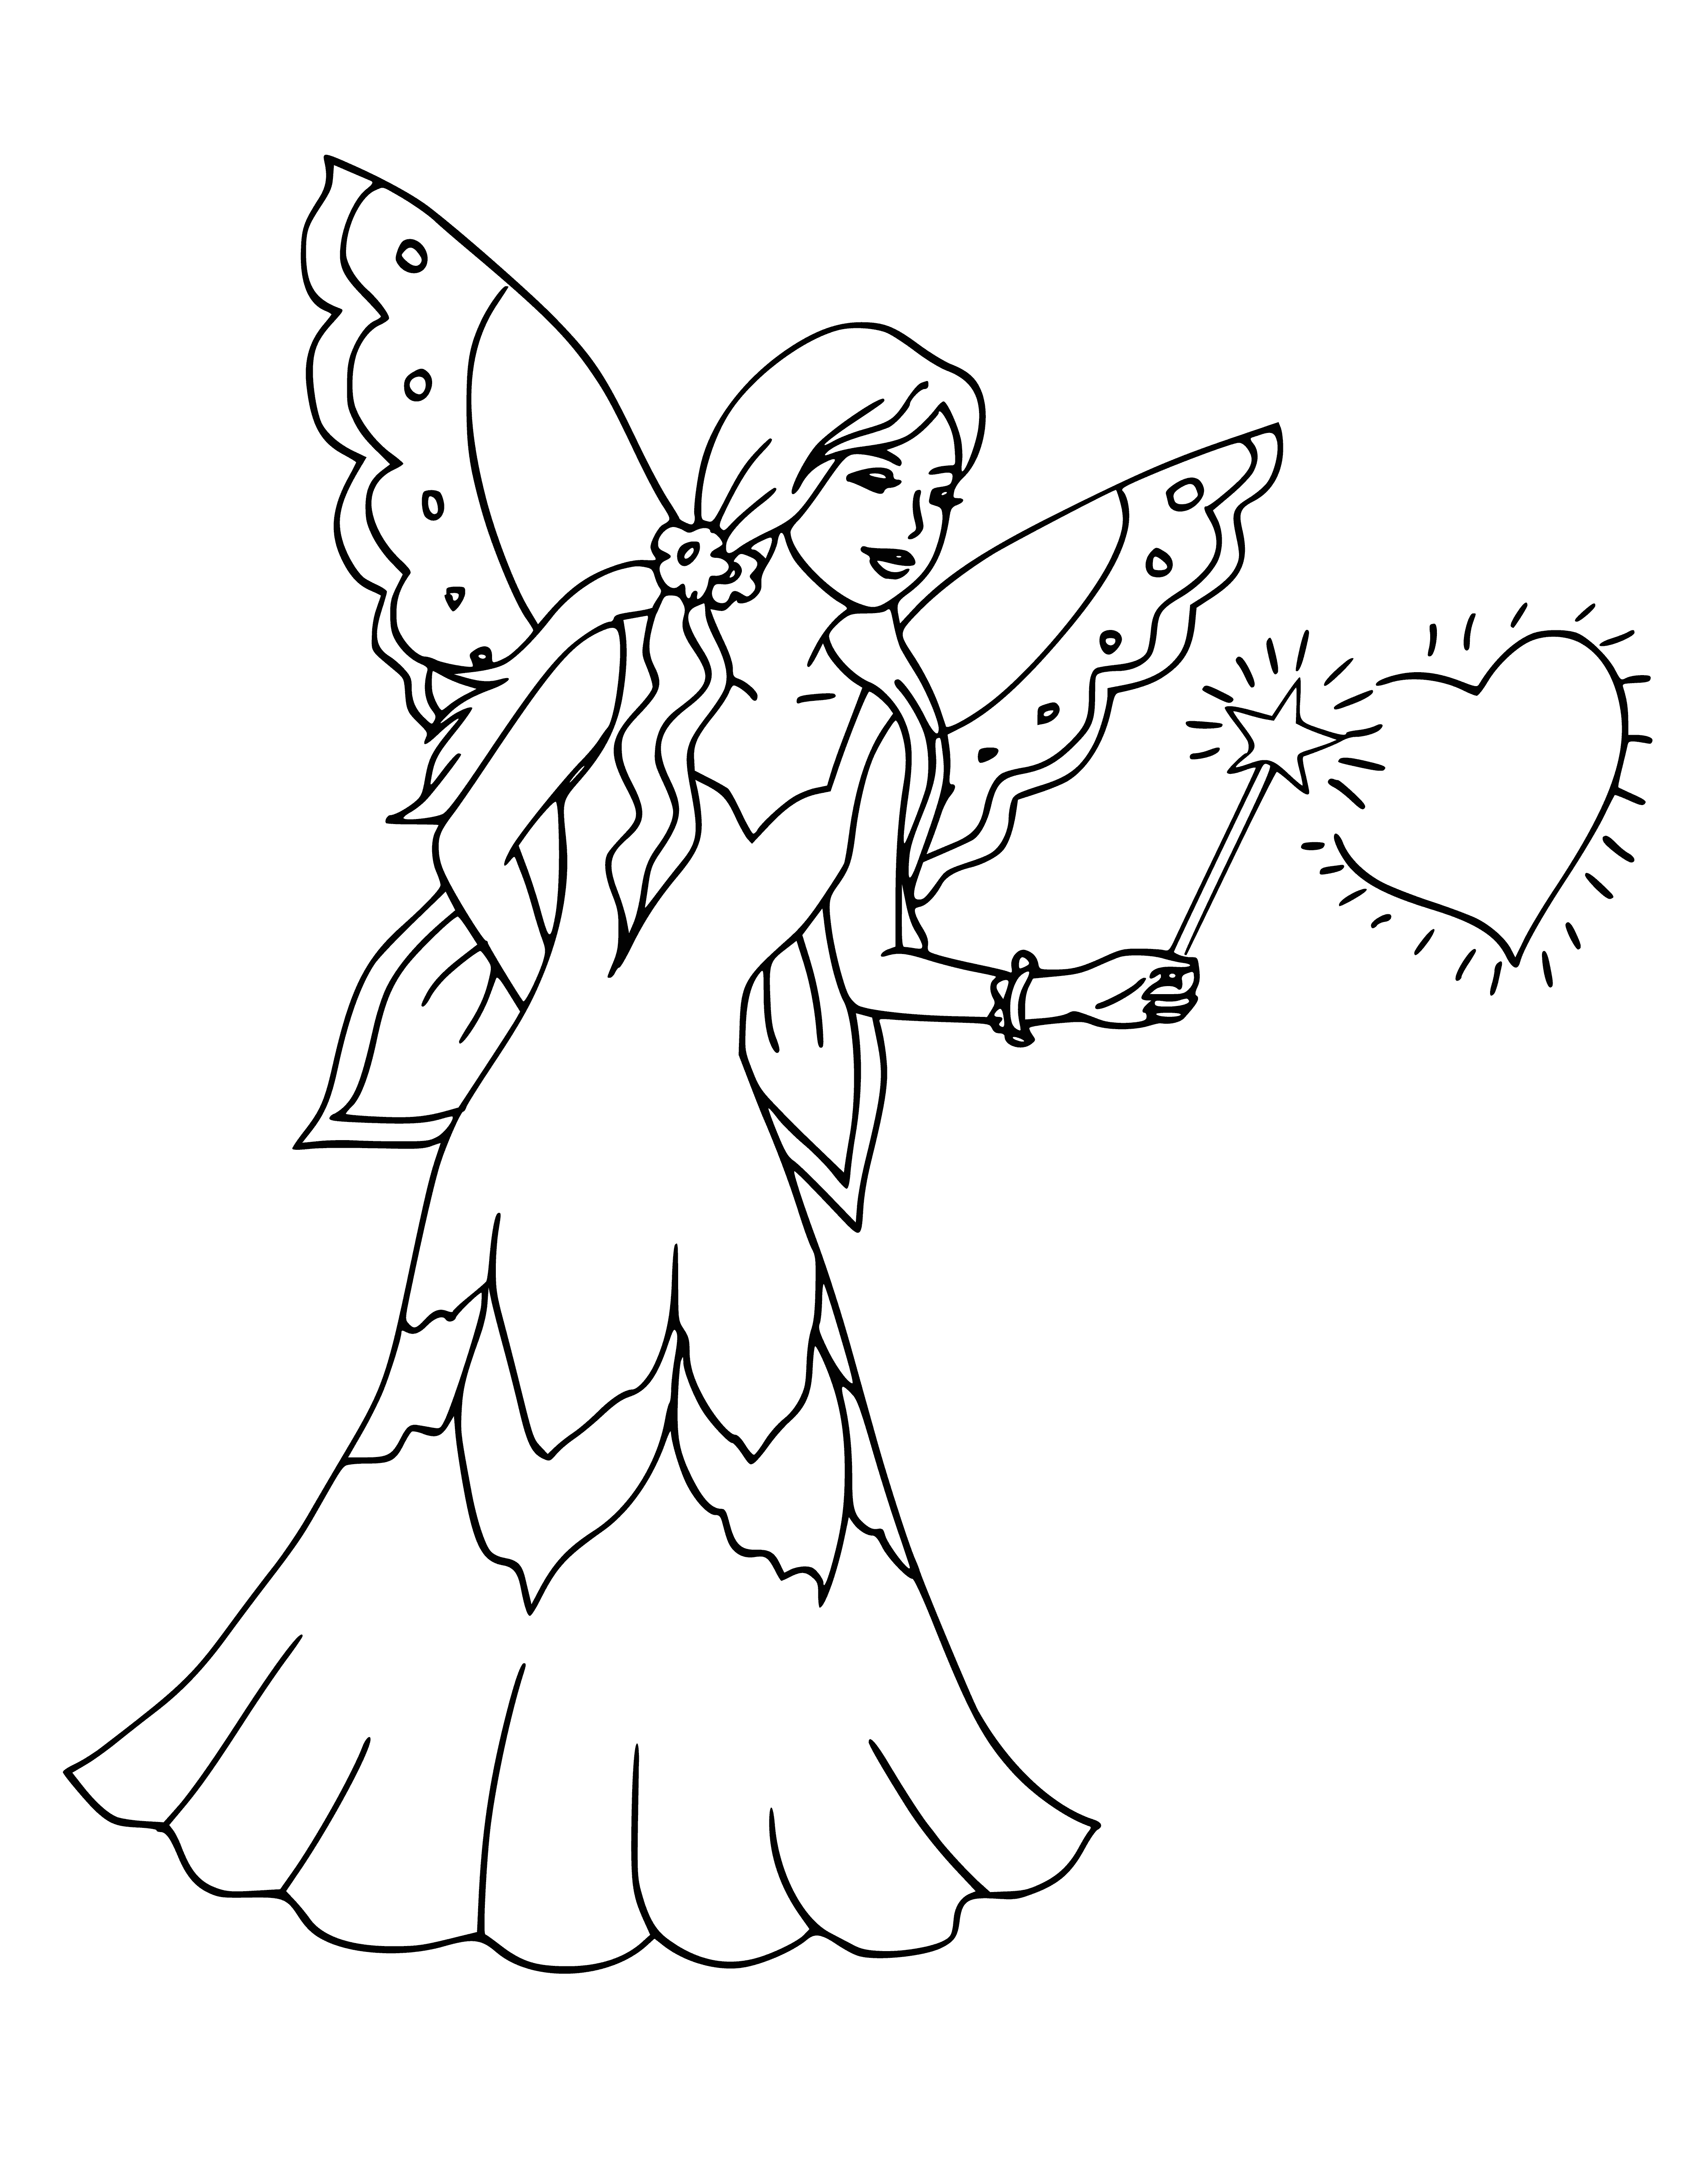 Fairy works magic coloring page